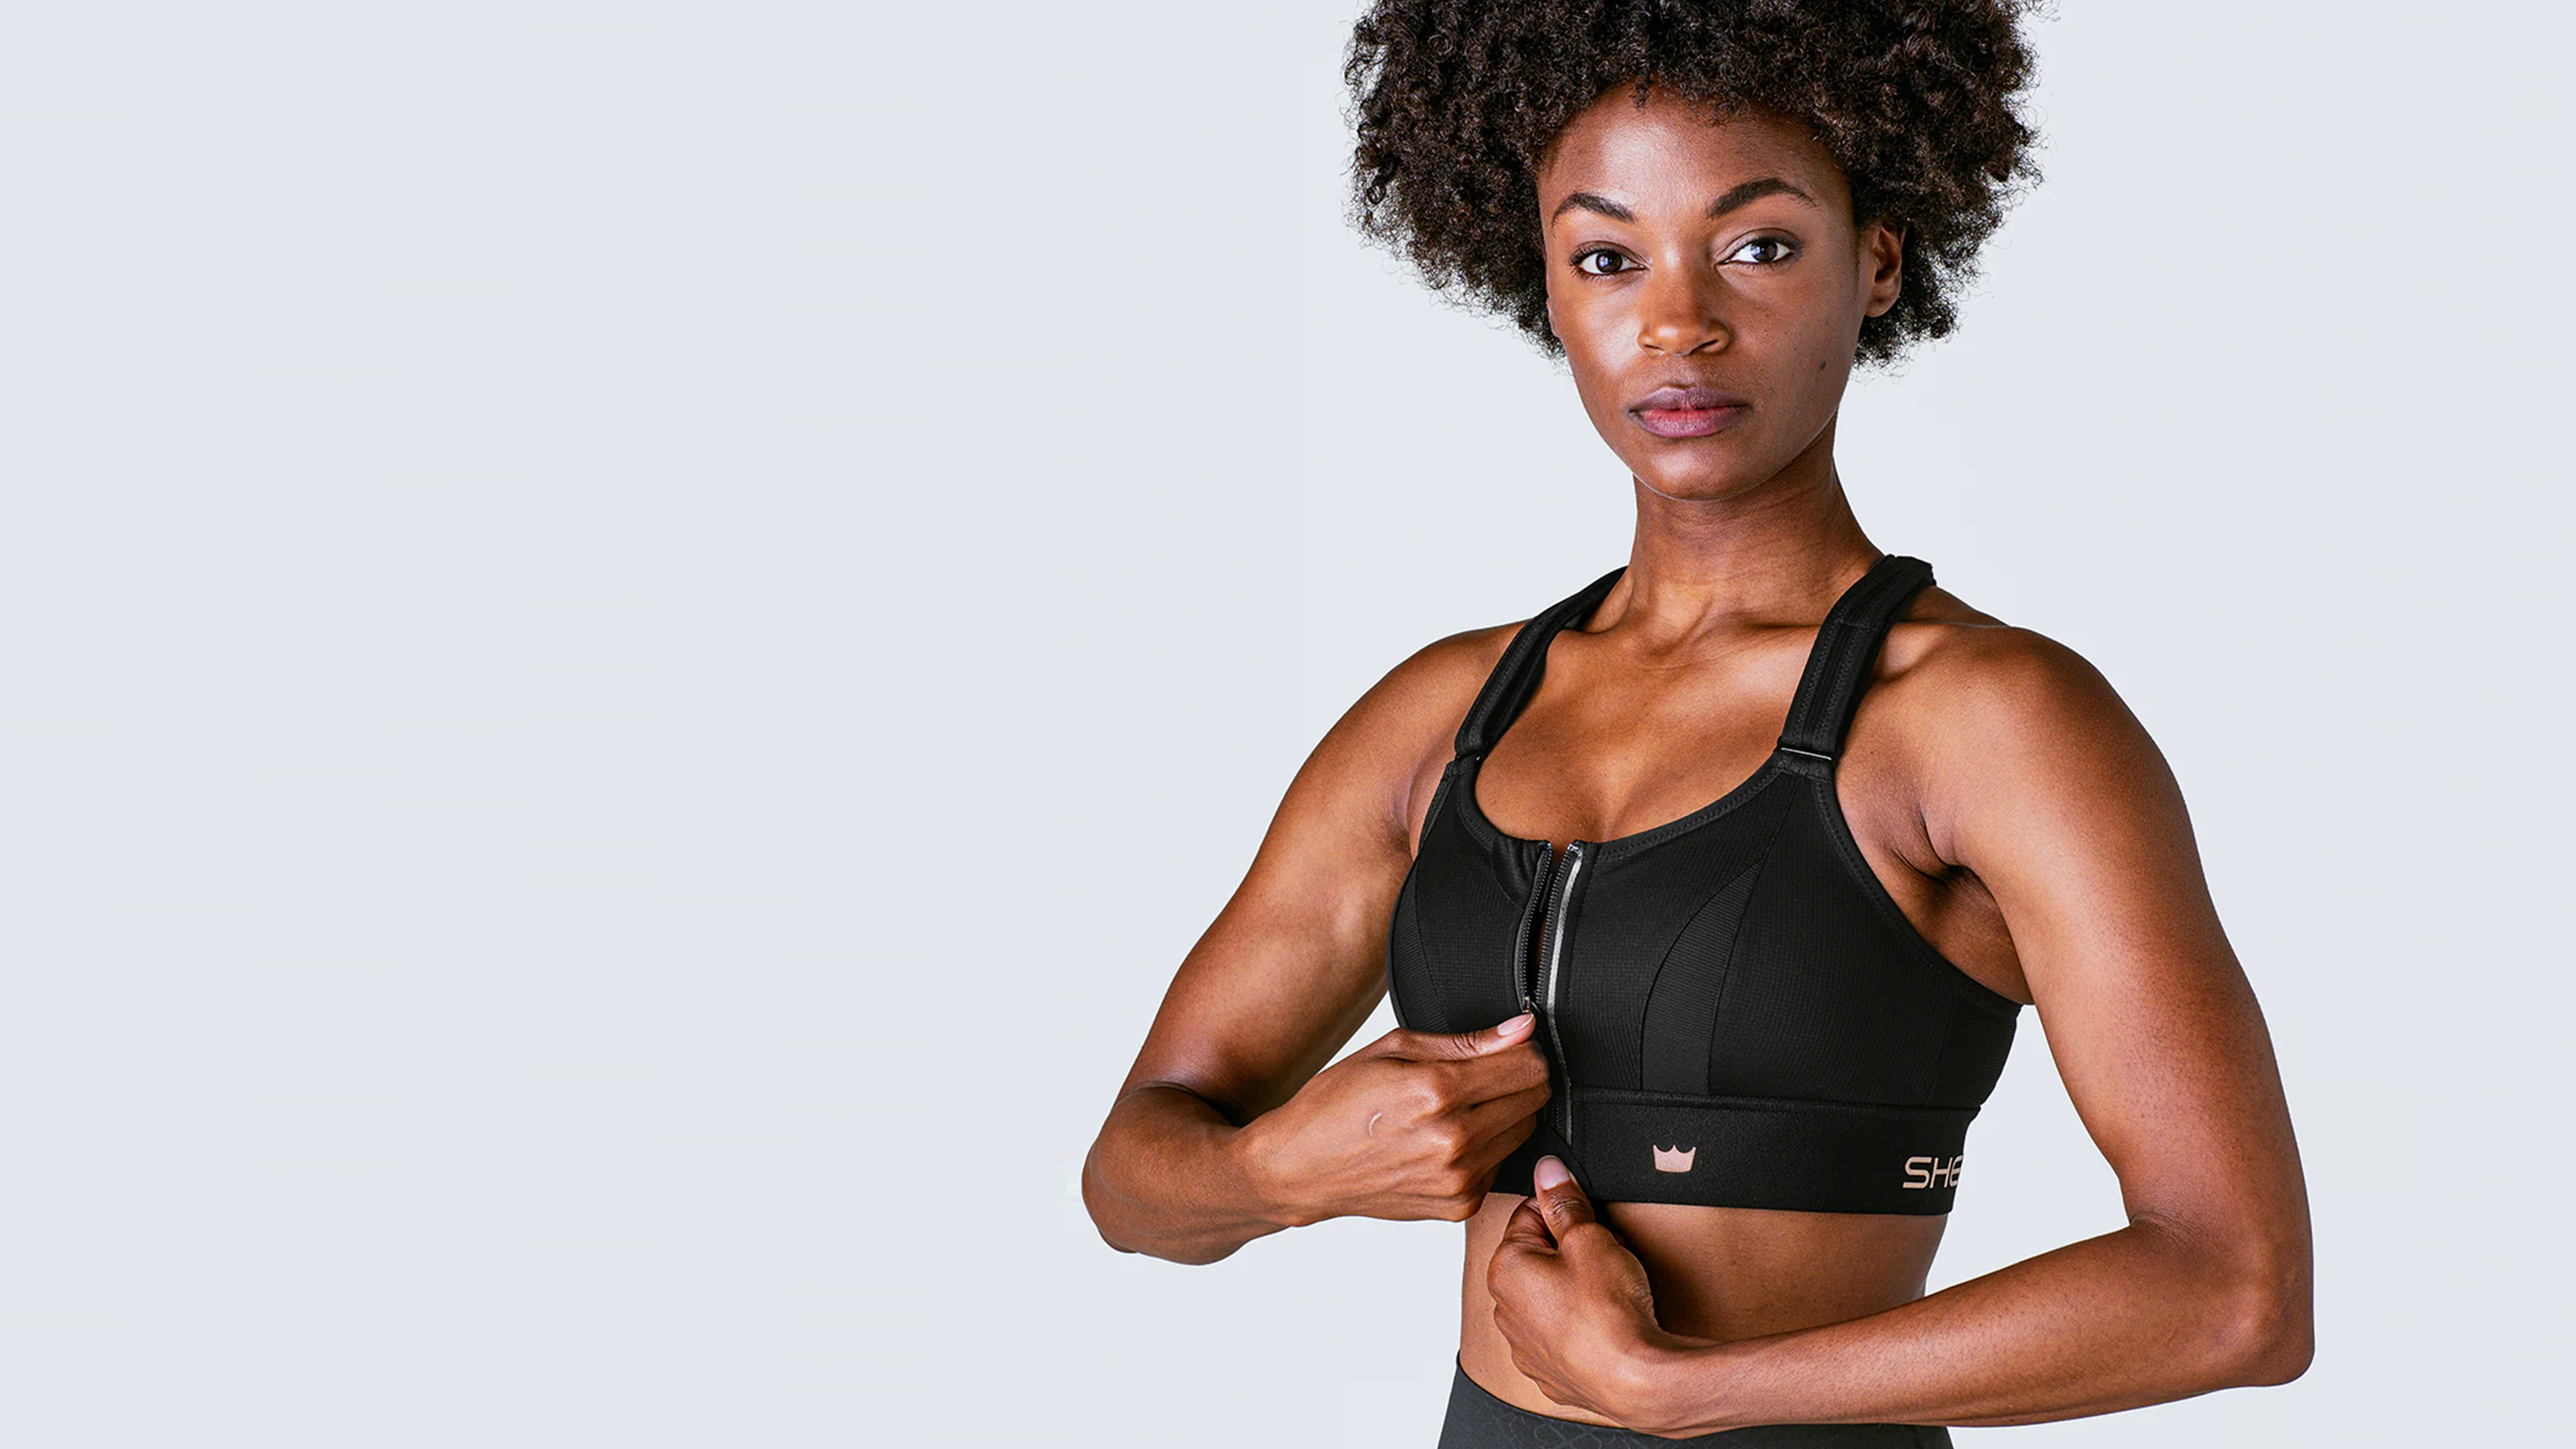 Finding a good sports bra doesn't have to be complicated. #shefit